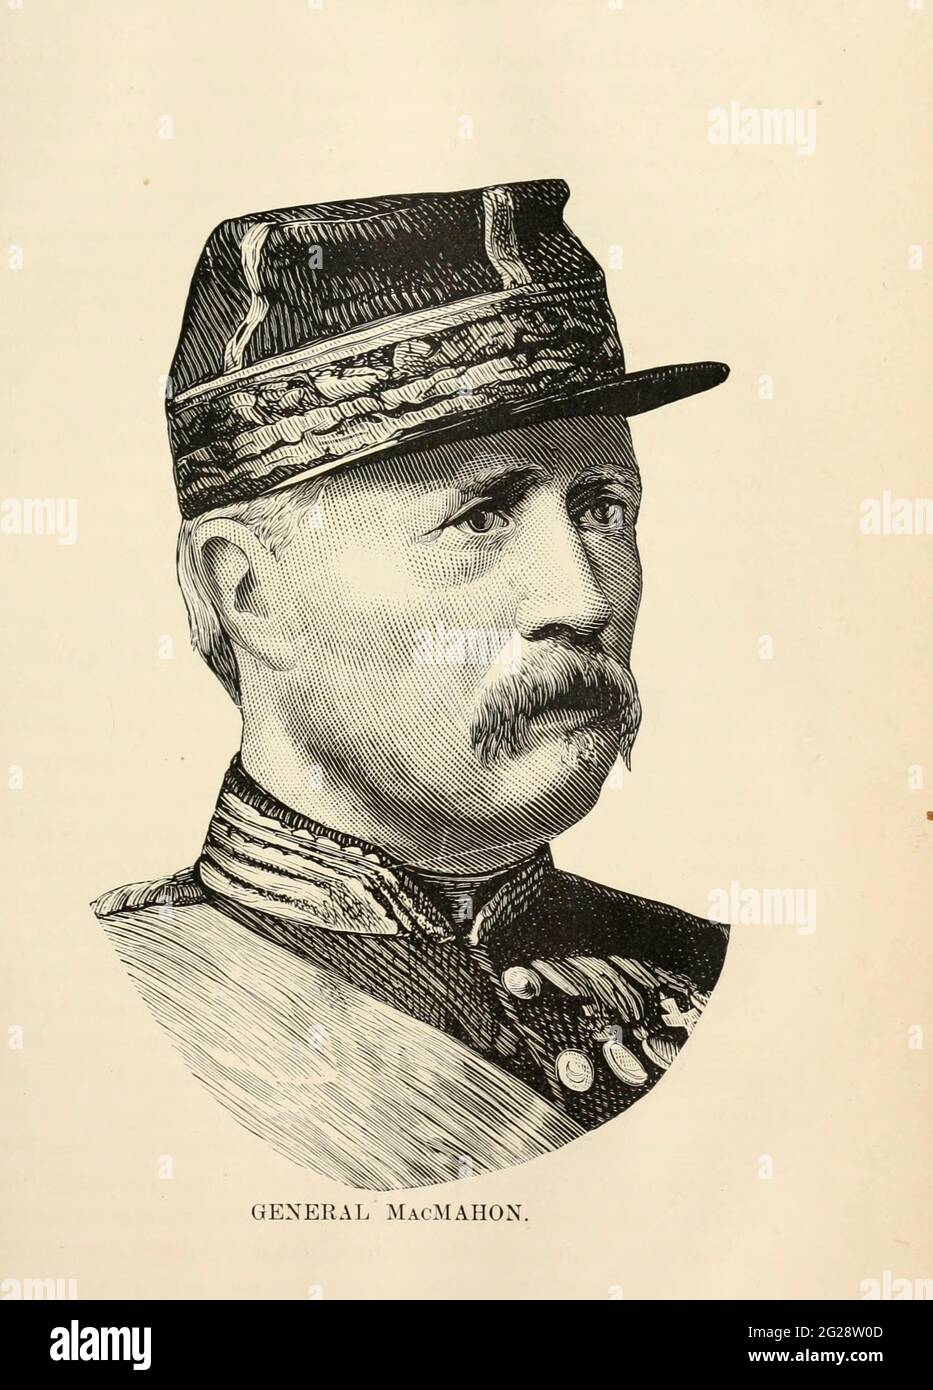 General MacMahon Marie Edme Patrice Maurice de MacMahon, marquis de MacMahon, duc de Magenta (13 June 1808 – 17 October 1893) was a French general and politician, with the distinction of Marshal of France. He served as Chief of State of France from 1873 to 1875 and as President of France, from 1875 to 1879. from the book Sights and sensations in Europe : sketches of travel and adventure in England, Ireland, France, Spain, Portugal, Germany, Switzerland, Italy, Austria, Poland, Hungary, Holland, and Belgium : with an account of the places and persons prominent in the Franco-German war by Browne Stock Photo